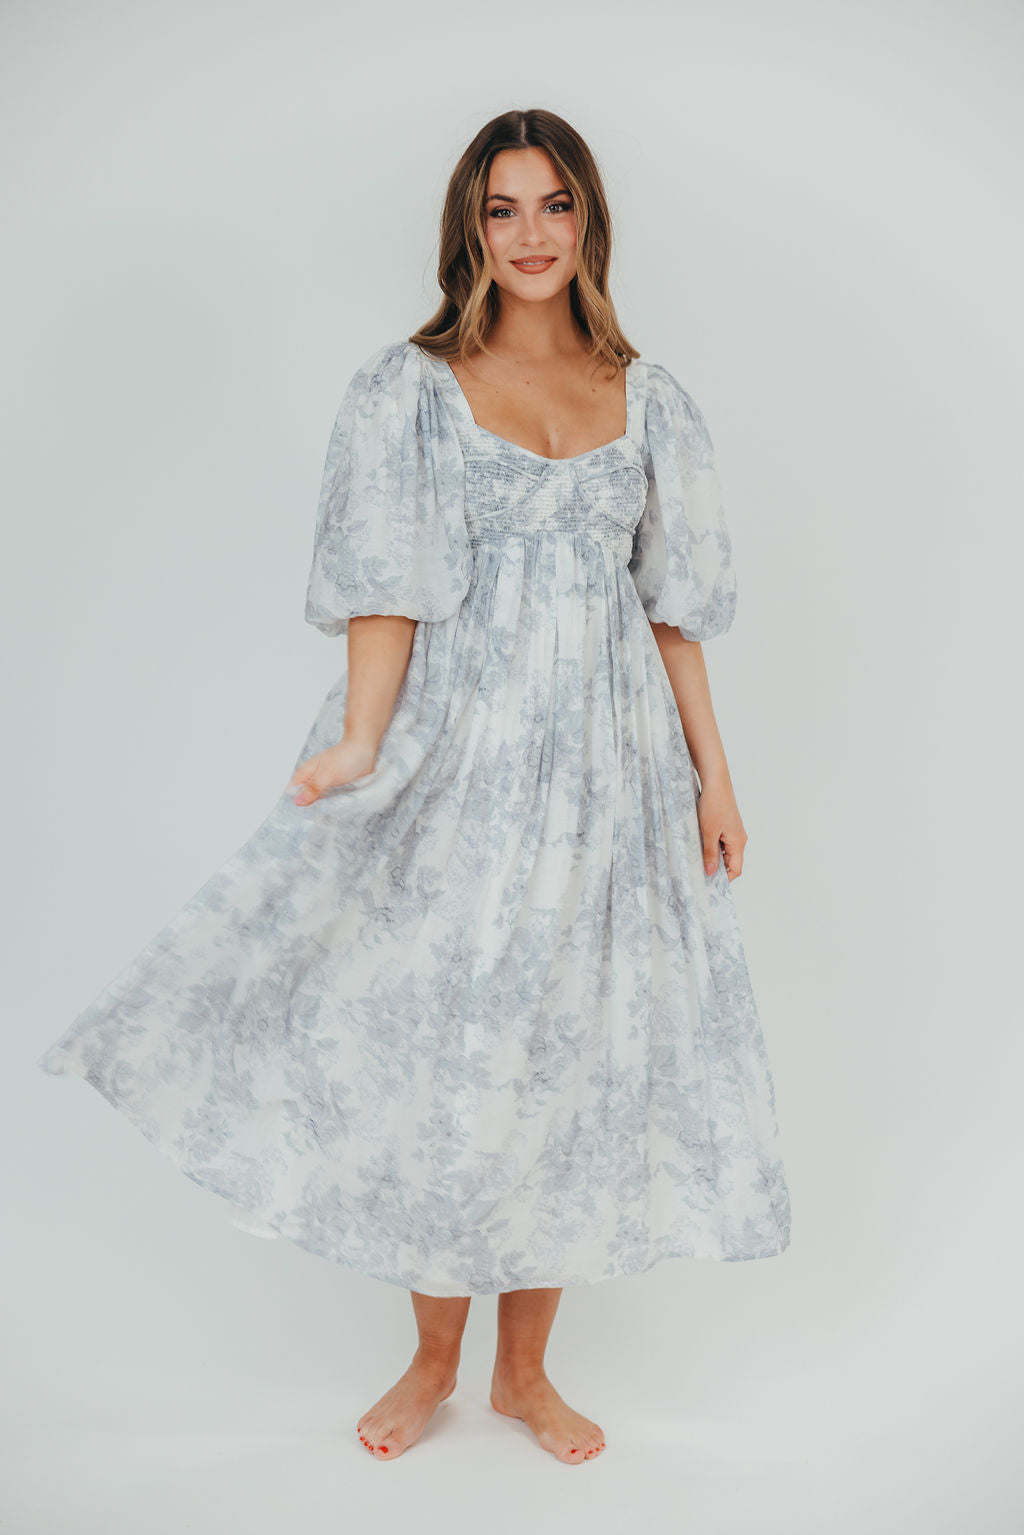 Harlow Maxi Dress in Light Blue Floral - Bump Friendly & Inclusive Sizing (S-3XL) - Sign up for Restocks Early May